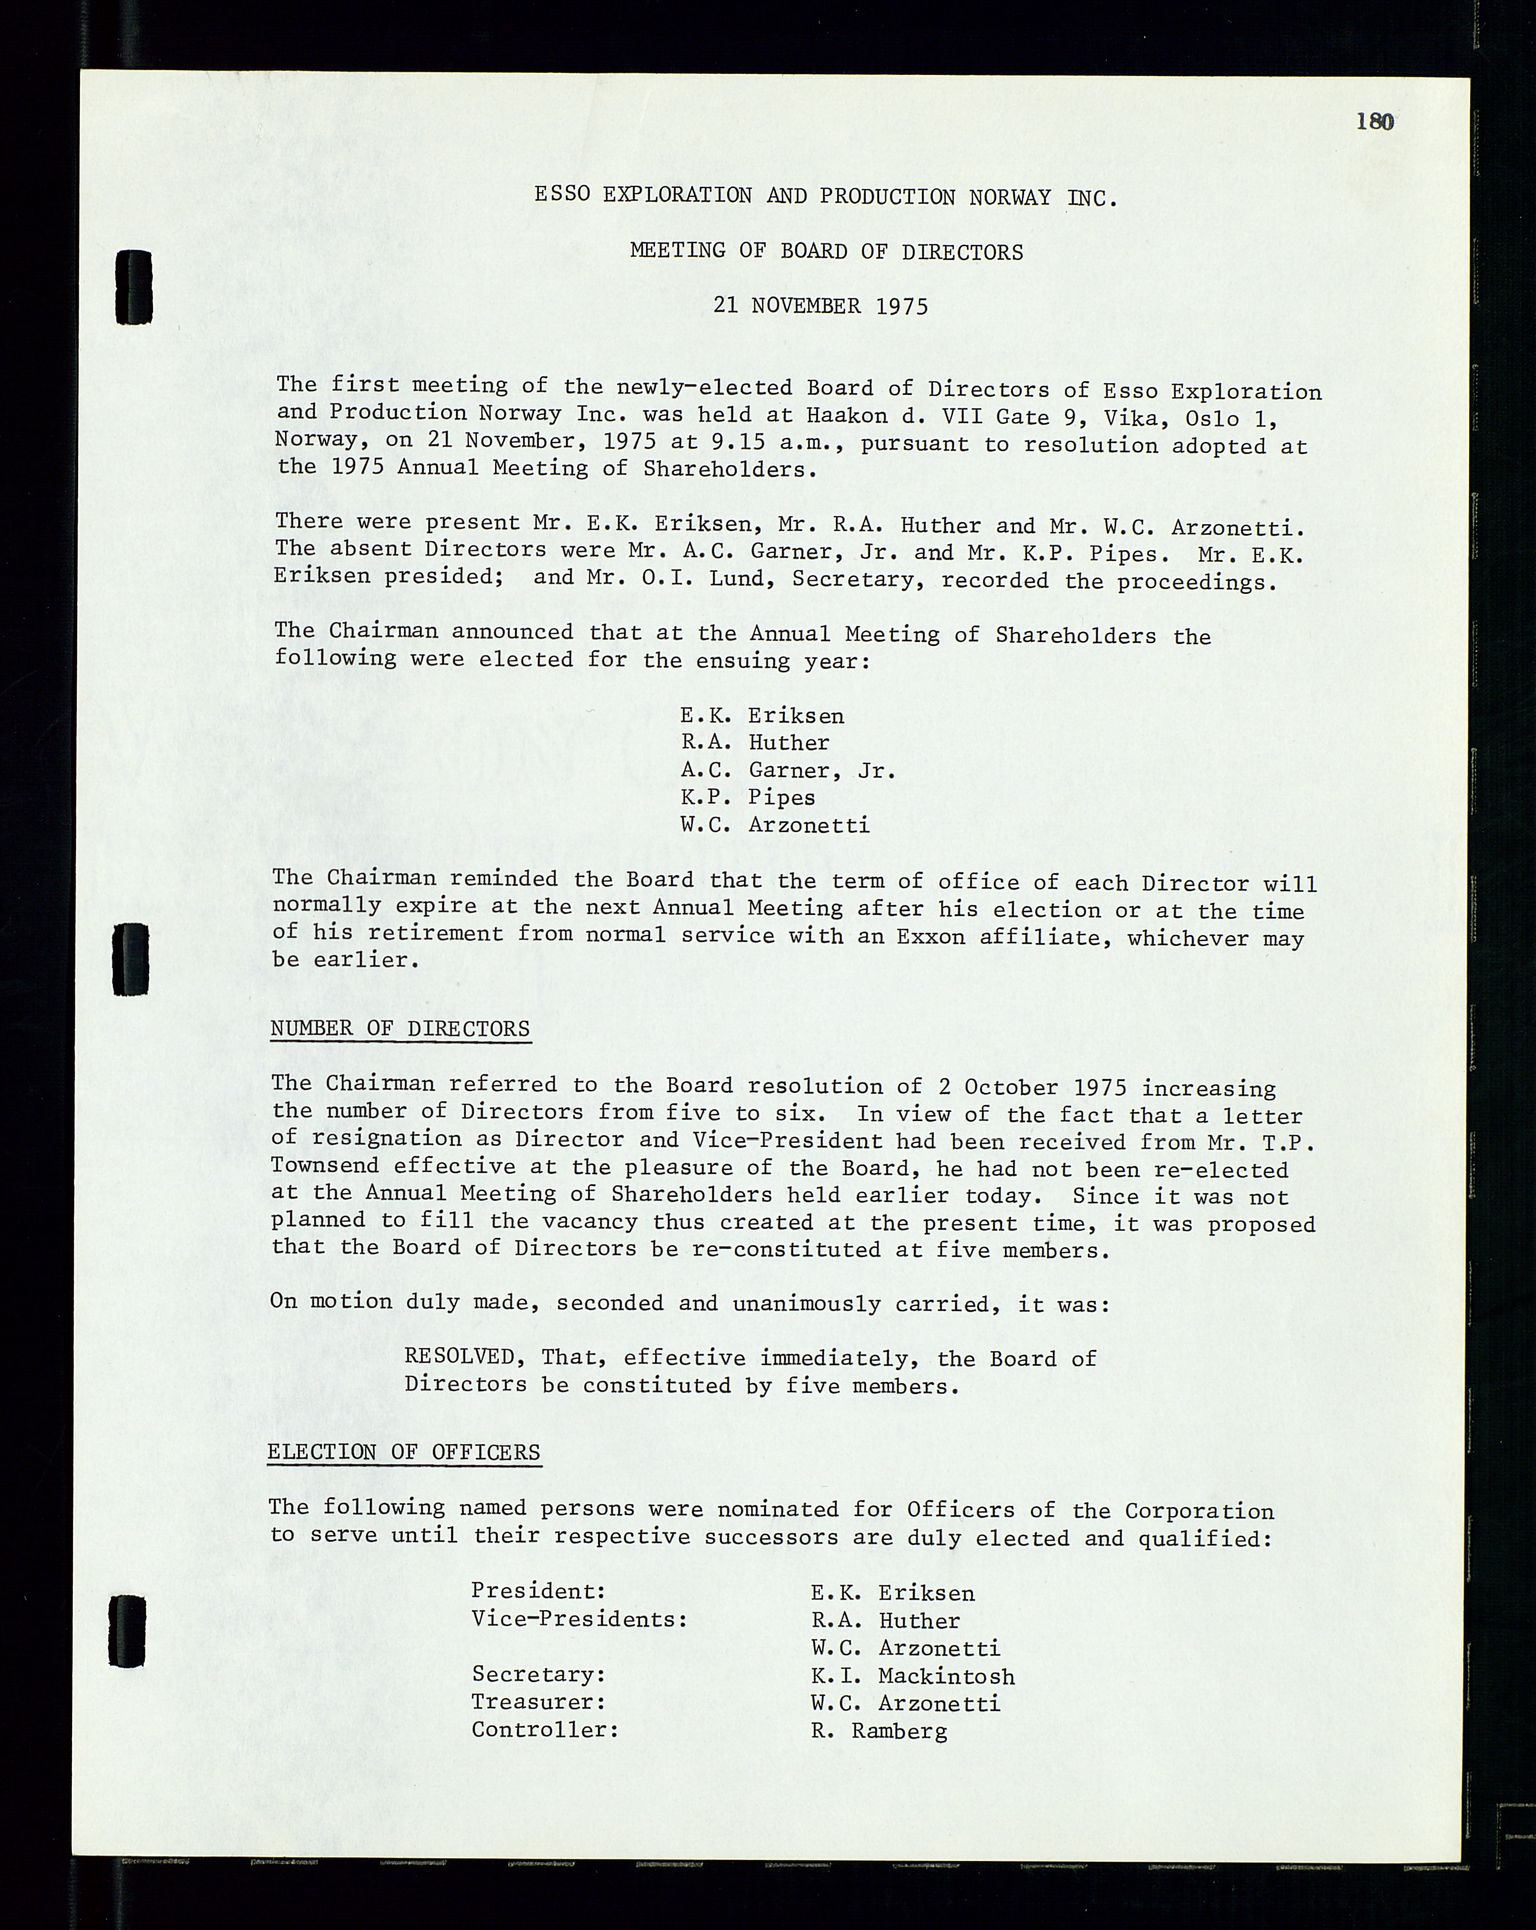 Pa 1512 - Esso Exploration and Production Norway Inc., SAST/A-101917/A/Aa/L0001/0002: Styredokumenter / Corporate records, Board meeting minutes, Agreements, Stocholder meetings, 1975-1979, s. 18